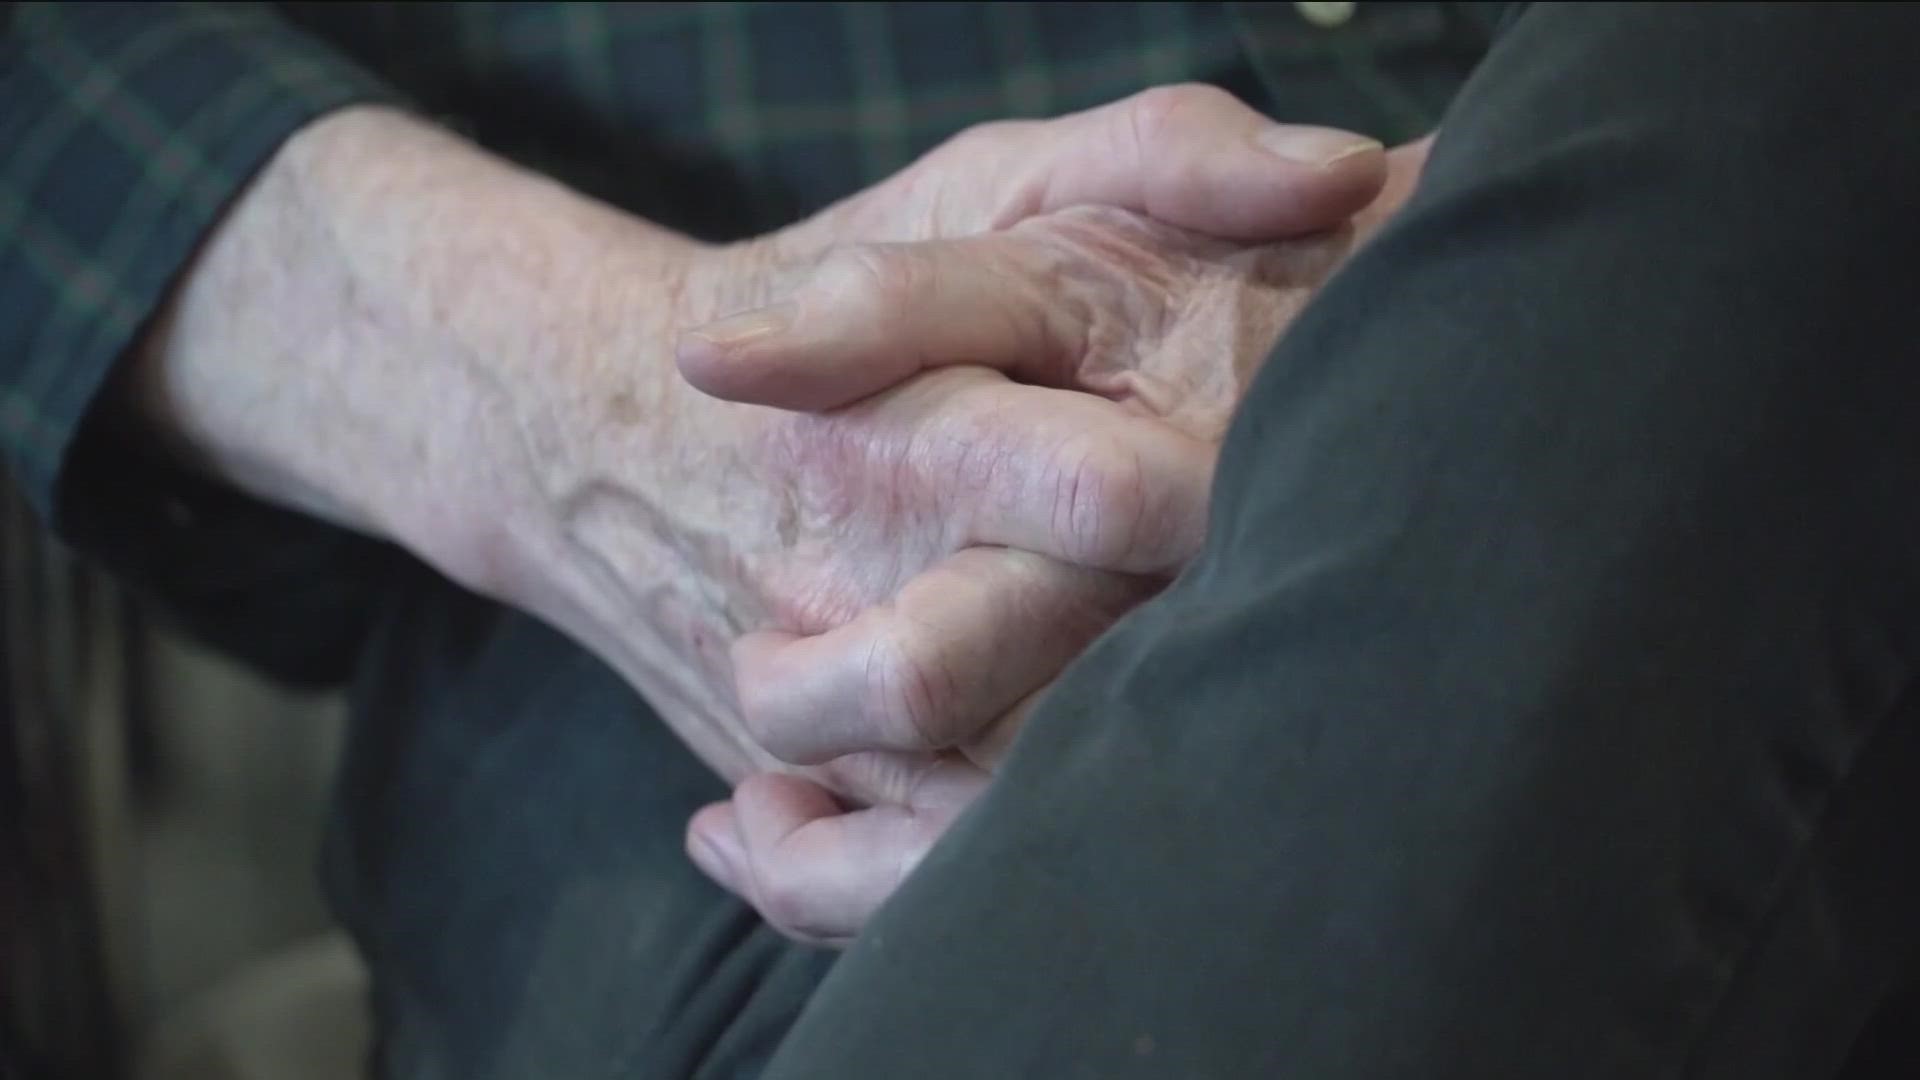 Residents of an independent living facility are feeling pushed aside after the mass power outages.